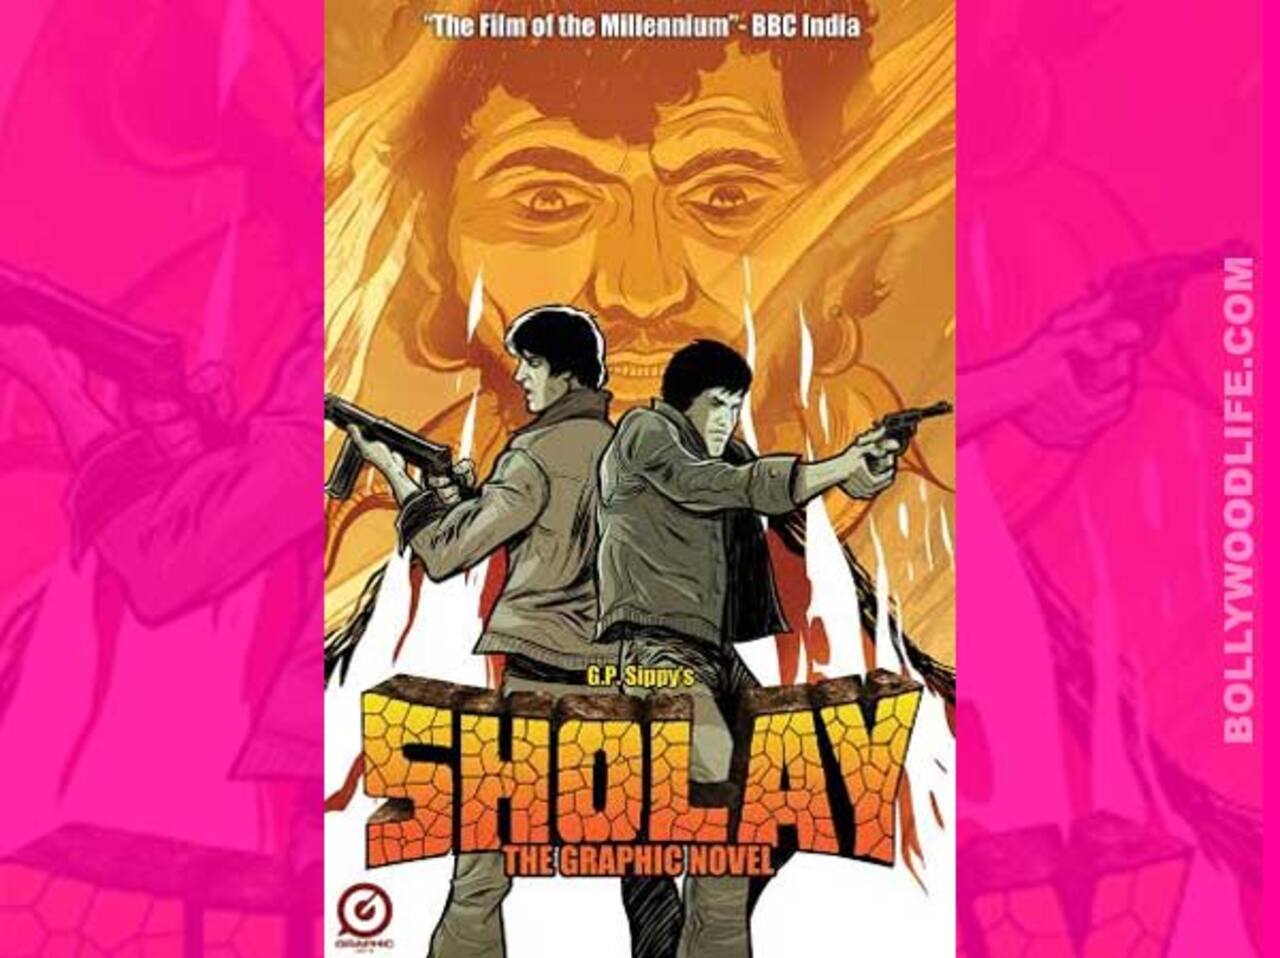 How long will the Sippys exploit Sholay?